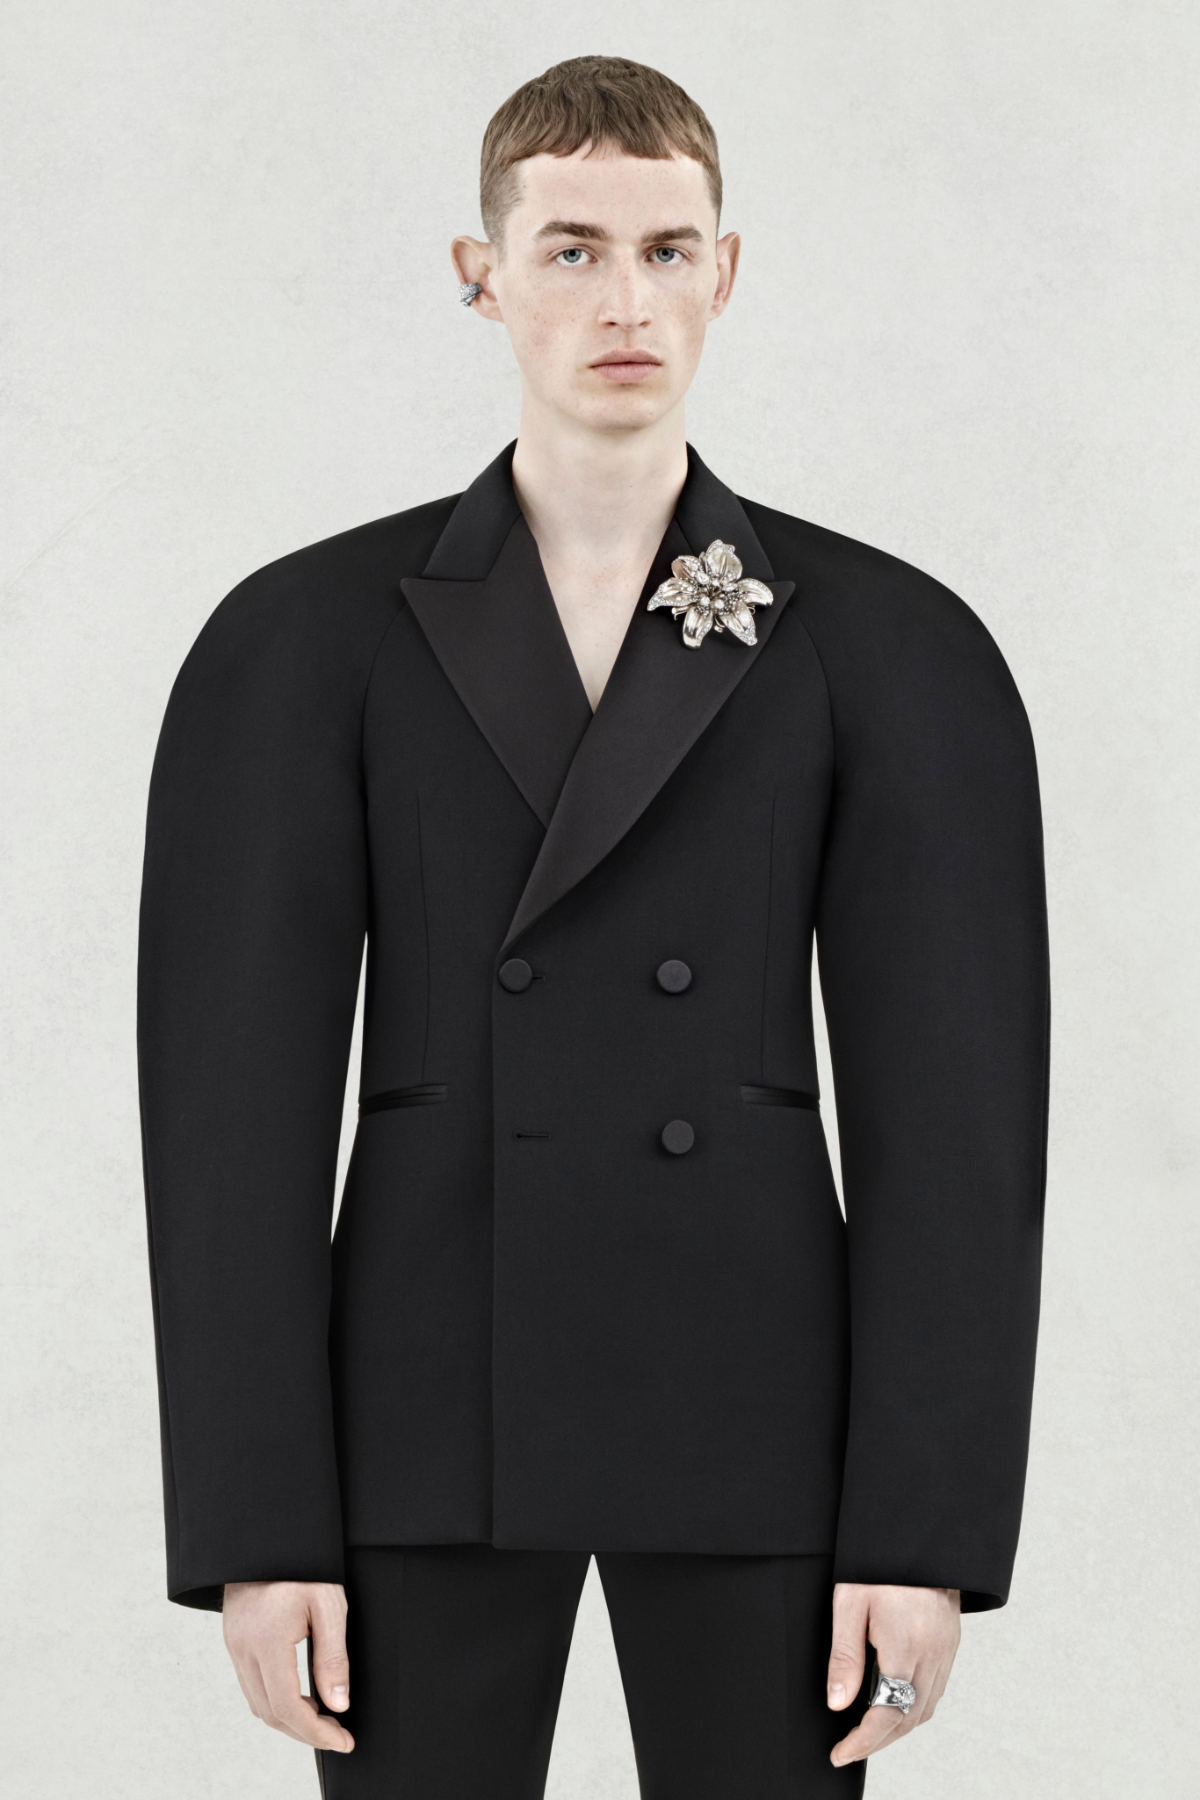 Alexander McQueen Presents Its New Spring Summer 2024 Menswear Collection